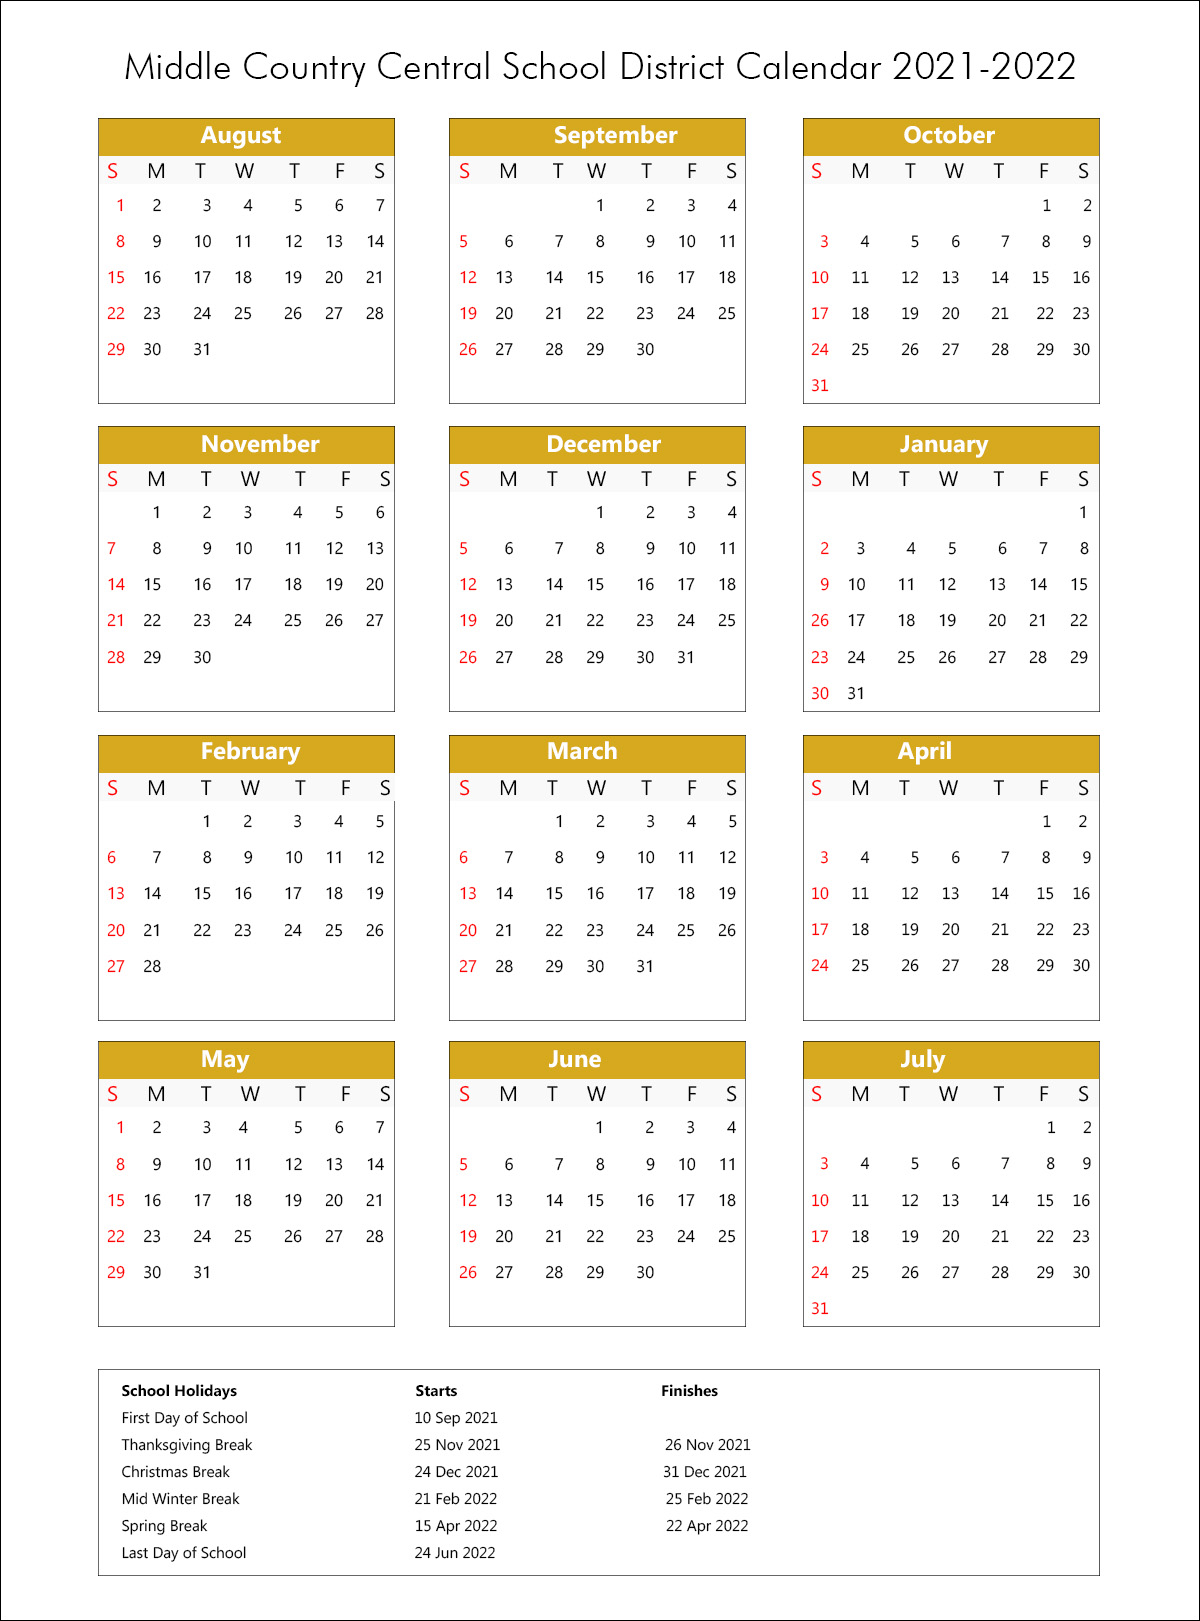 Middle Country Central School District Calendar 2021